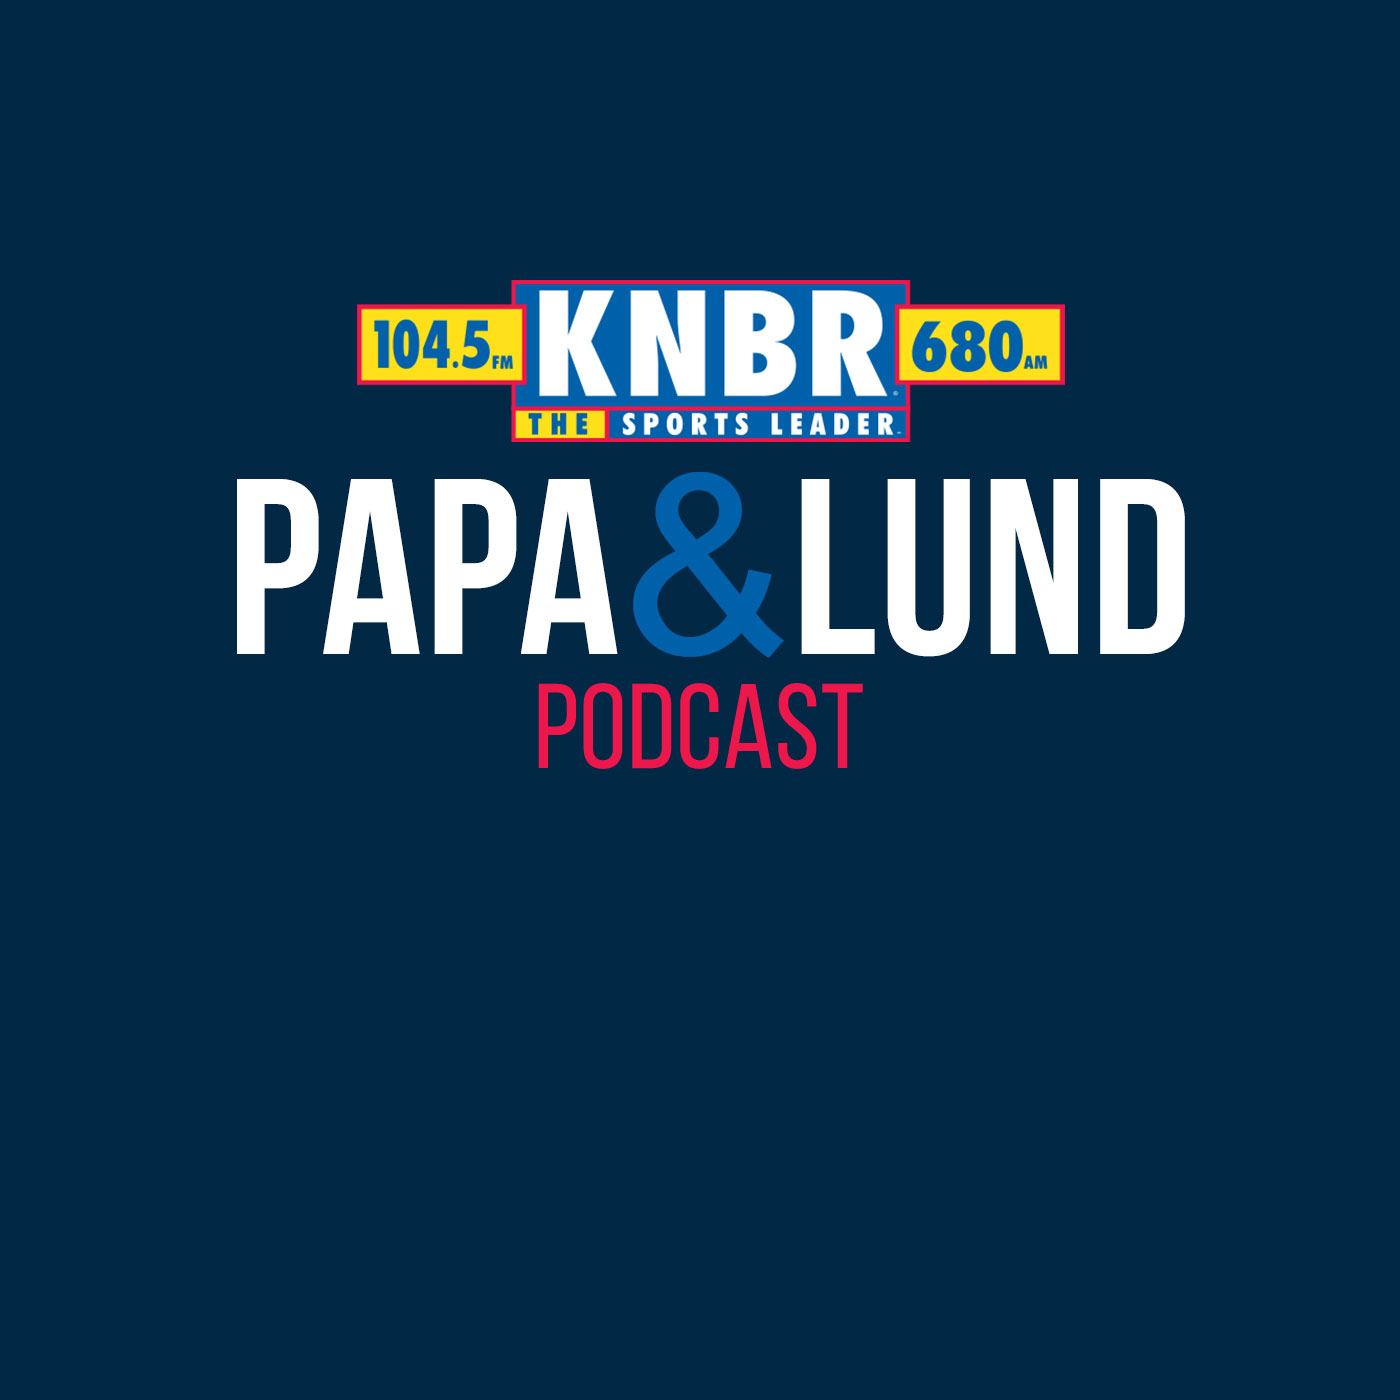 3-27 Susan Slusser joins Papa & Lund to break down the roster construction for the 2023 Giants Opening Day roster as they open up against Aaron Judge in the Bronx